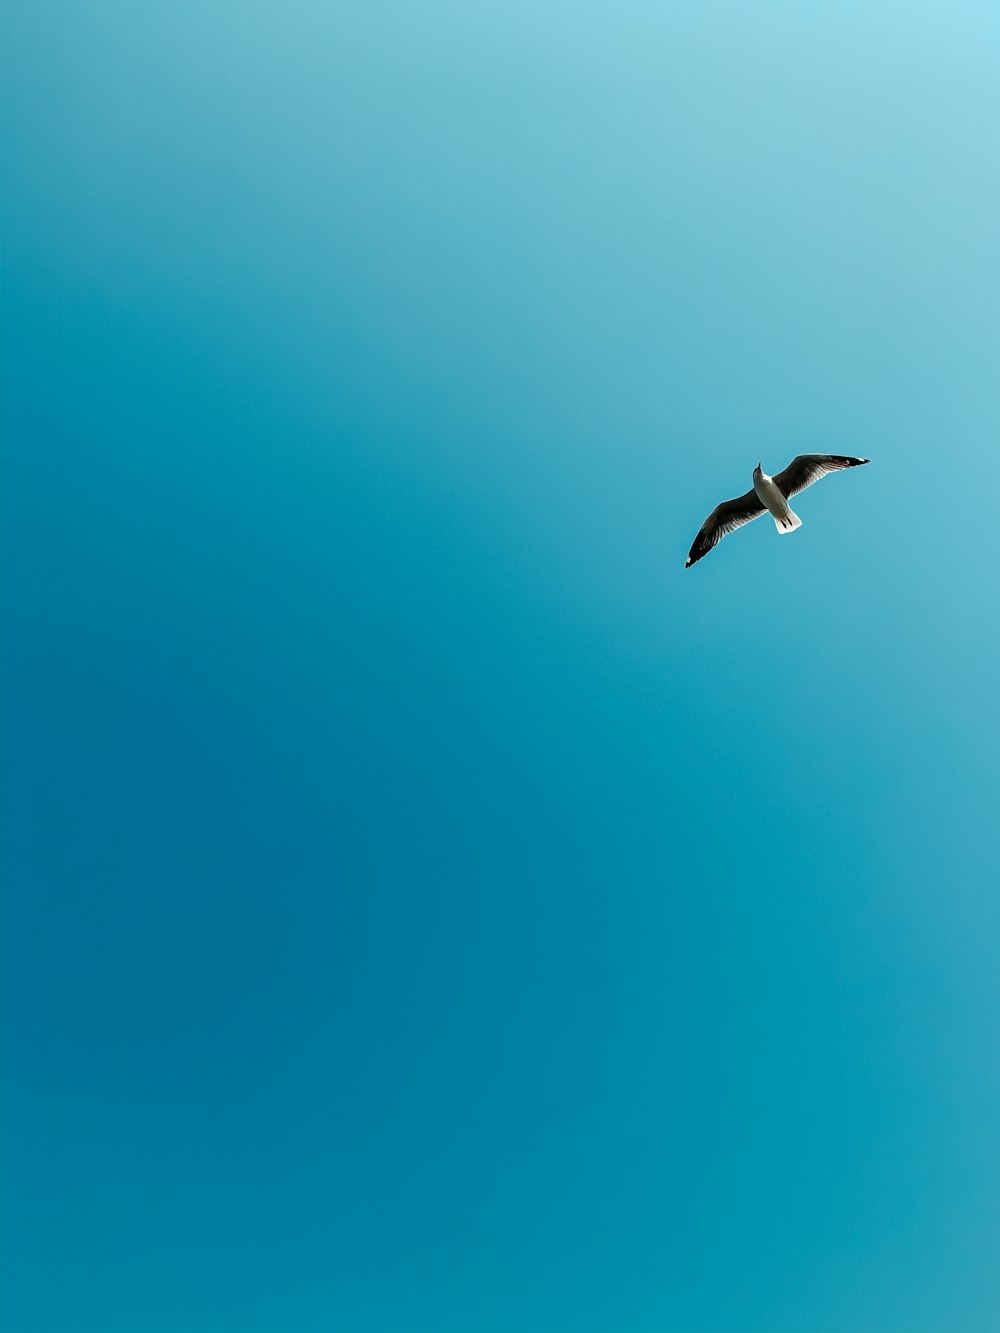 550+ Bird In Sky Pictures | Download Free Images on Unsplash